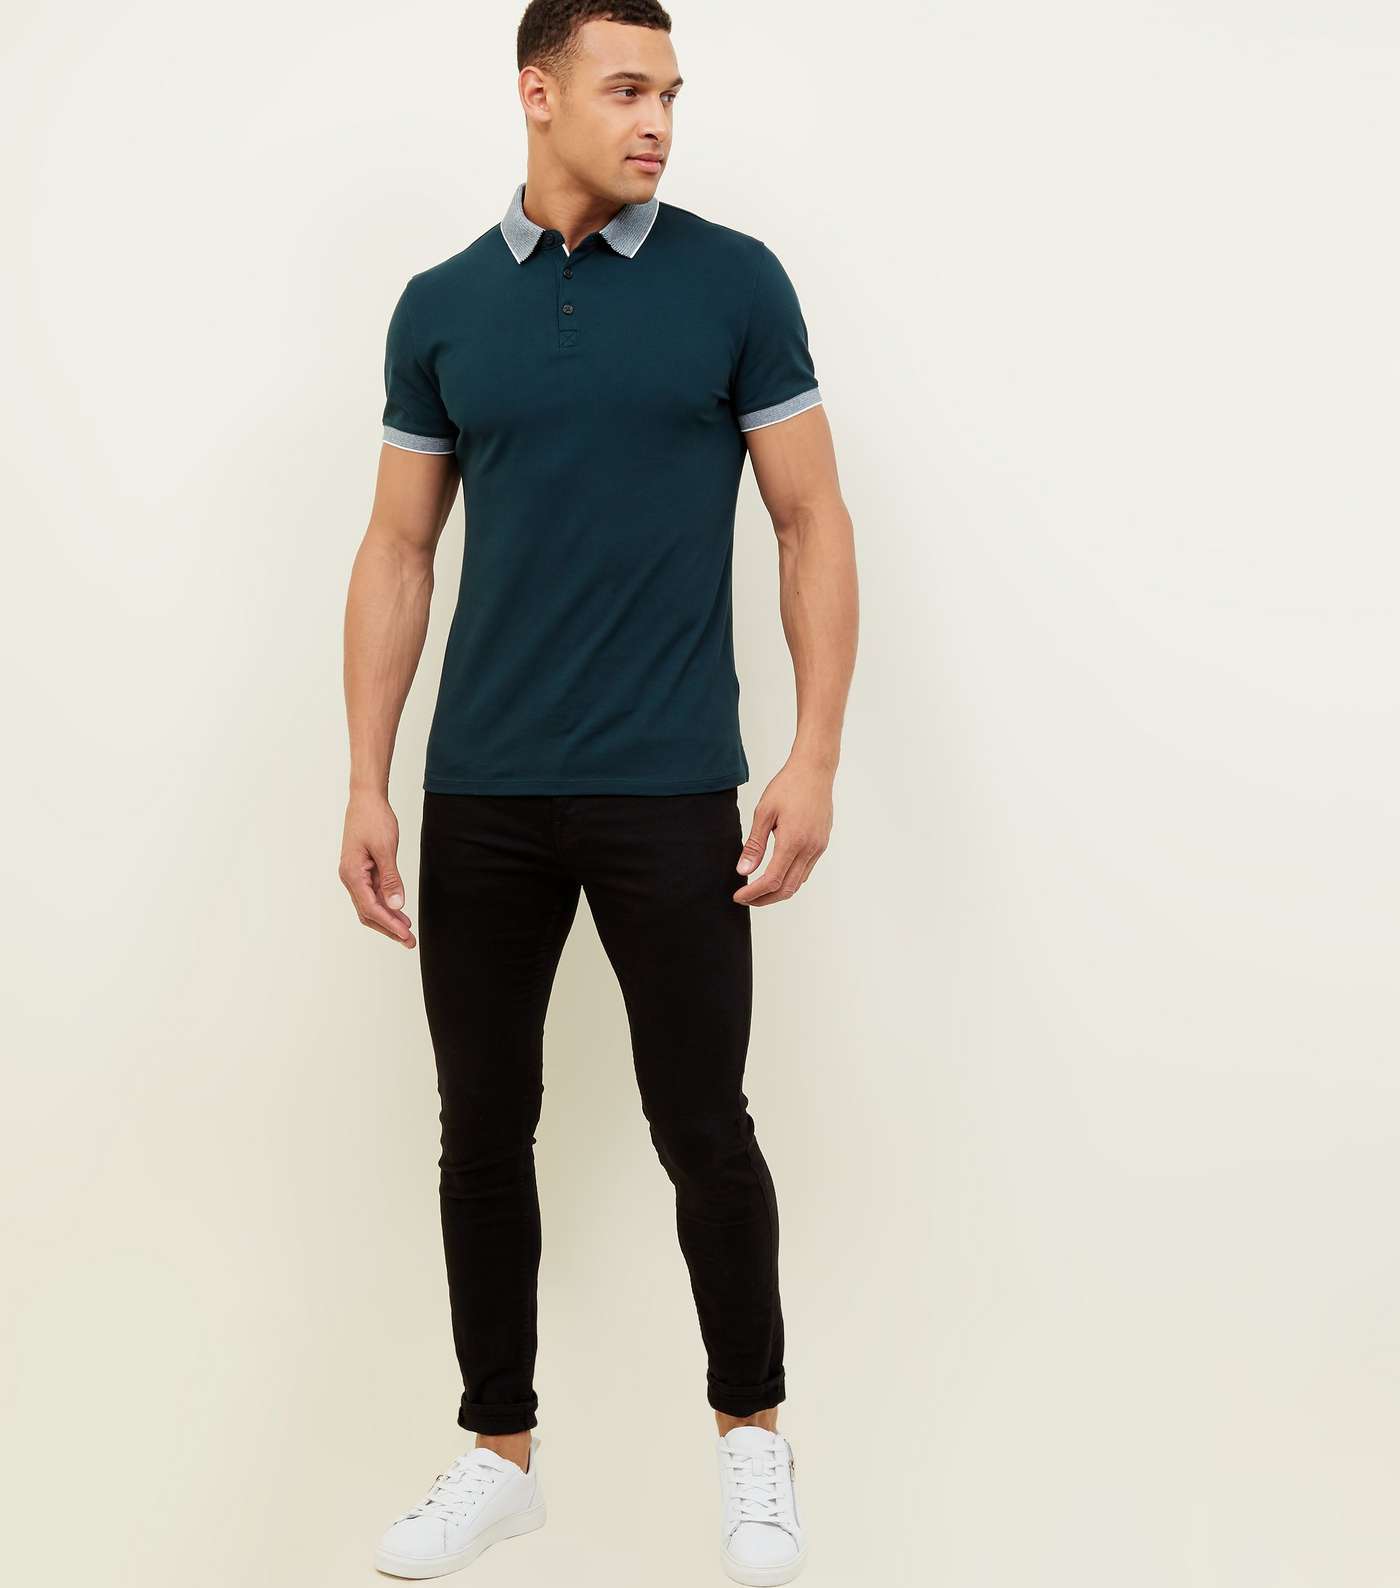 Teal Stripe Collar Muscle Fit Polo Shirt Image 2